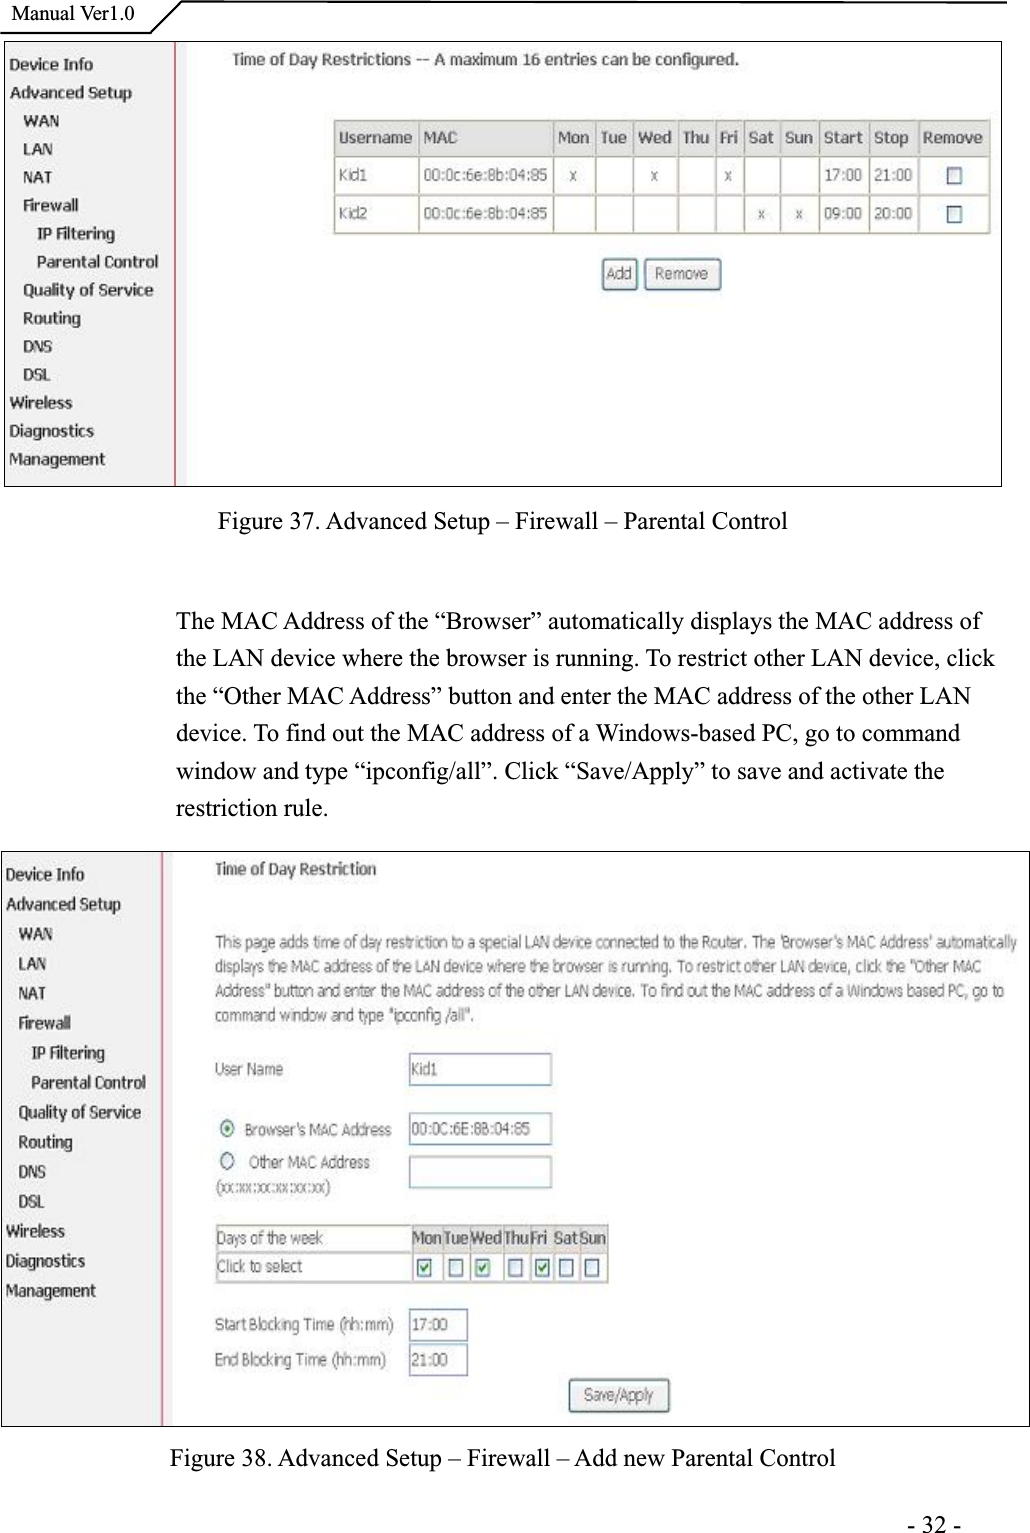  Manual Ver1.0Figure 37. Advanced Setup – Firewall – Parental Control The MAC Address of the “Browser” automatically displays the MAC address of the LAN device where the browser is running. To restrict other LAN device, click the “Other MAC Address” button and enter the MAC address of the other LAN device. To find out the MAC address of a Windows-based PC, go to command window and type “ipconfig/all”. Click “Save/Apply” to save and activate the restriction rule. Figure 38. Advanced Setup – Firewall – Add new Parental Control                                                                      -32-